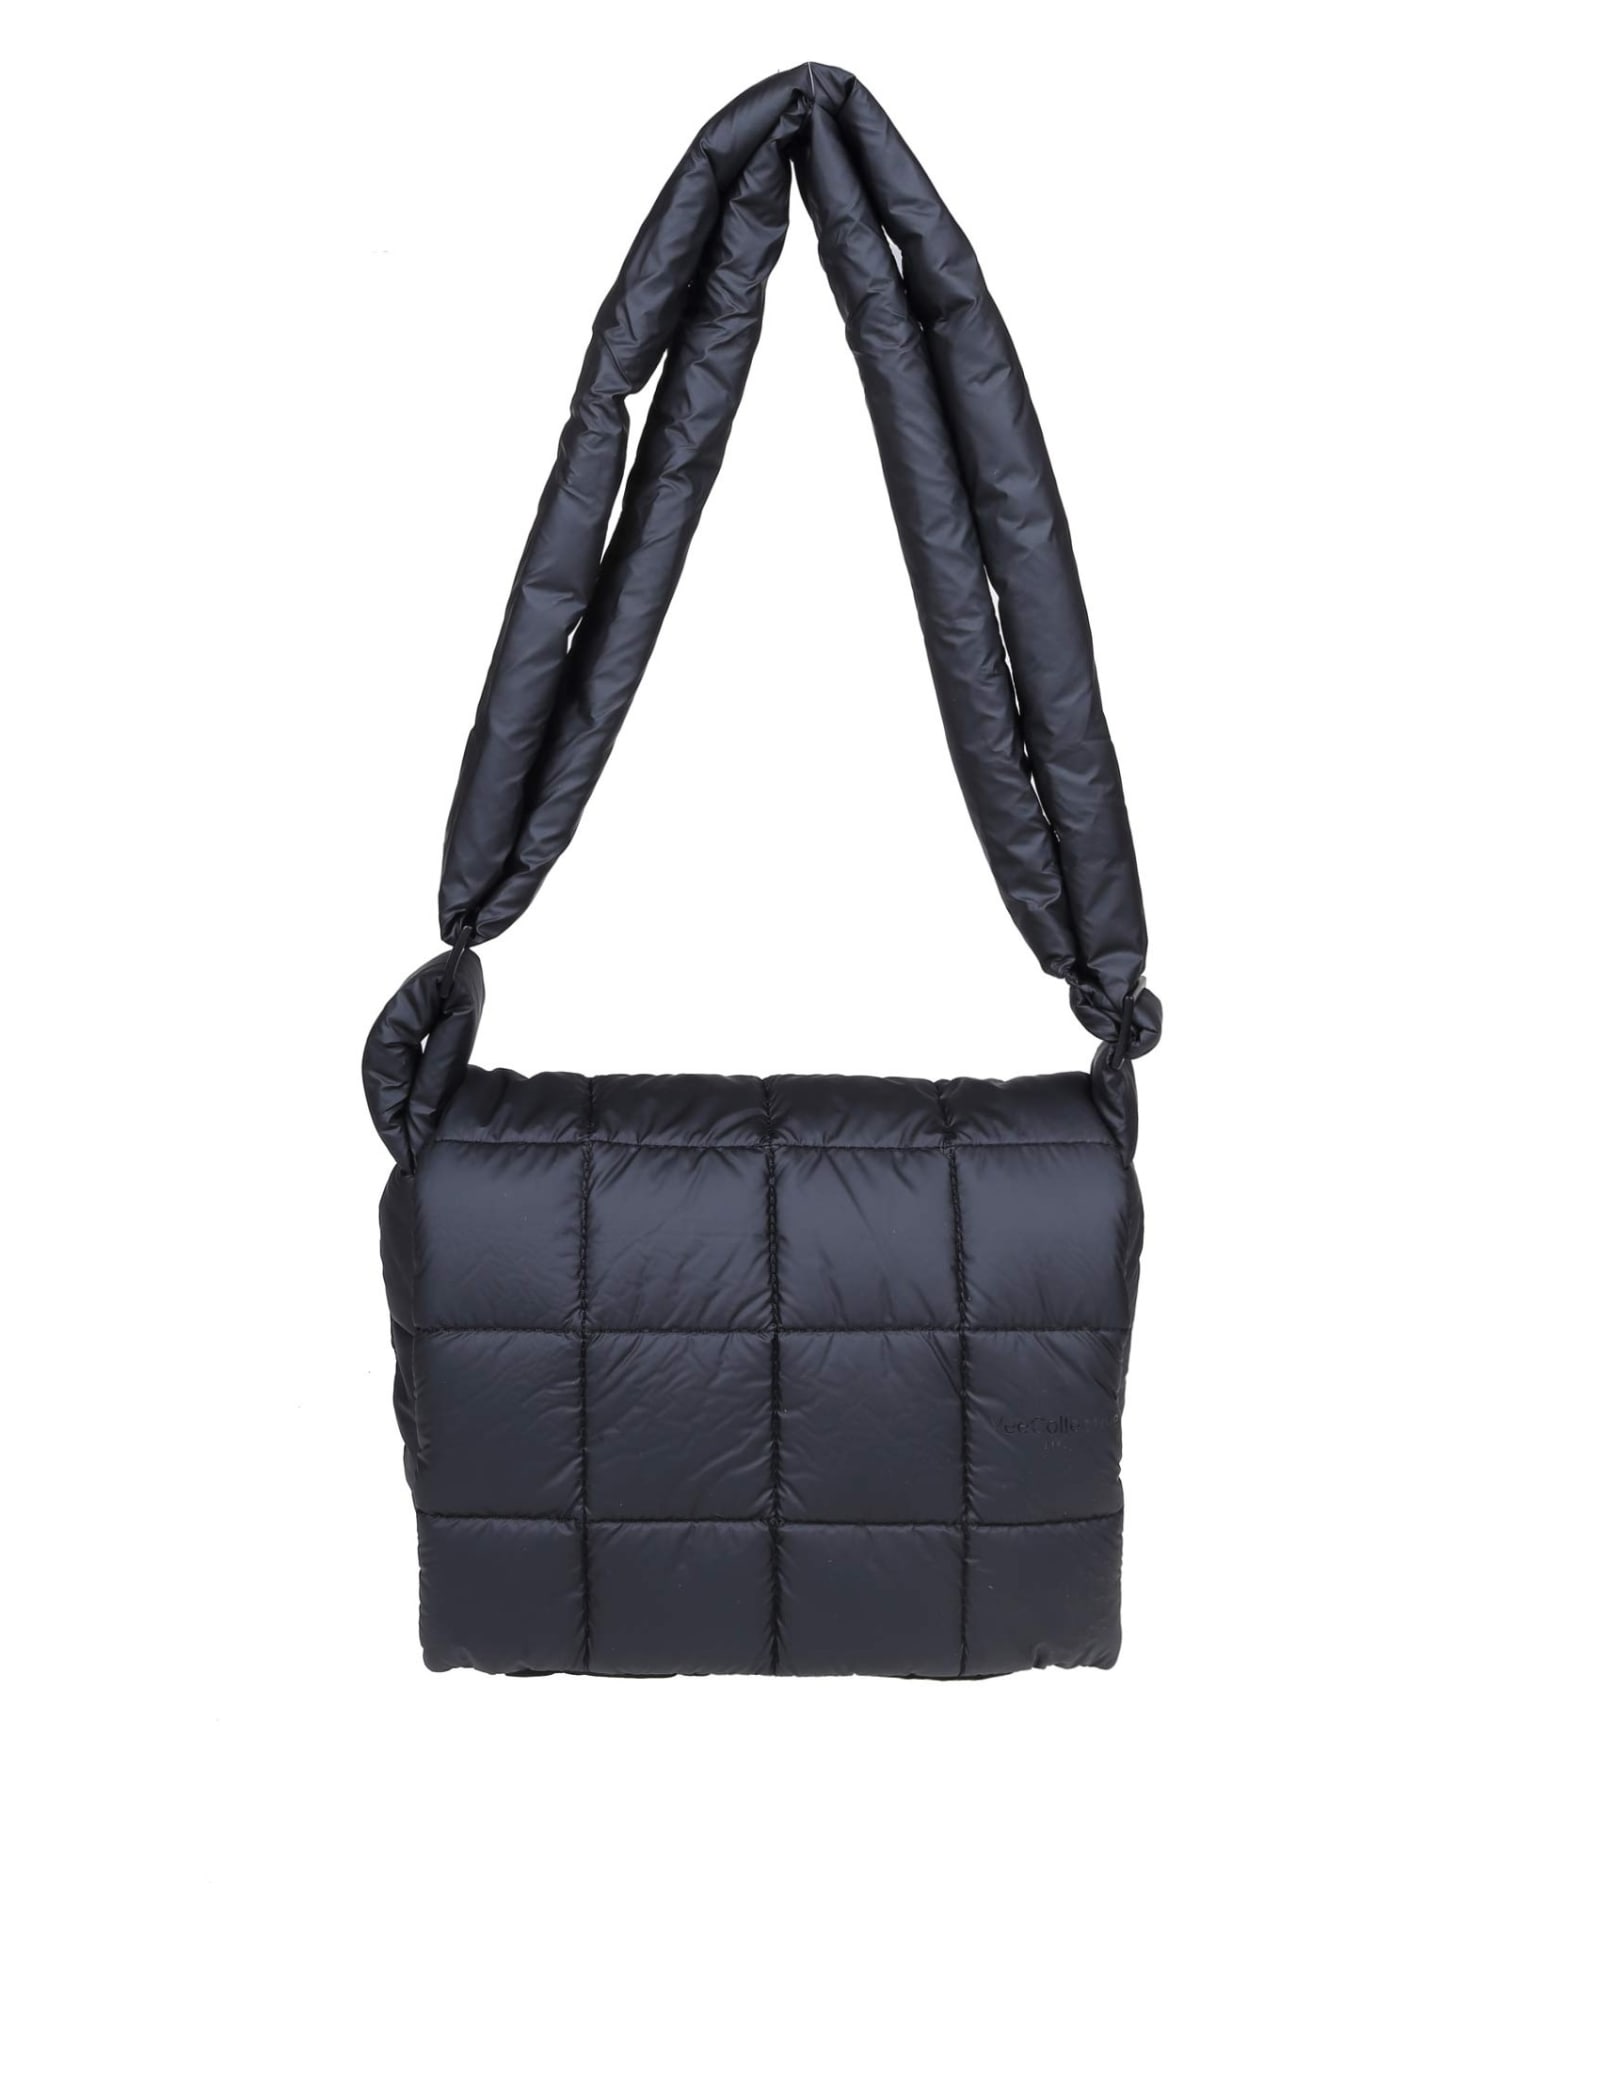 VeeCollective Collective Messenger Vee Bag With Quilted Fabric